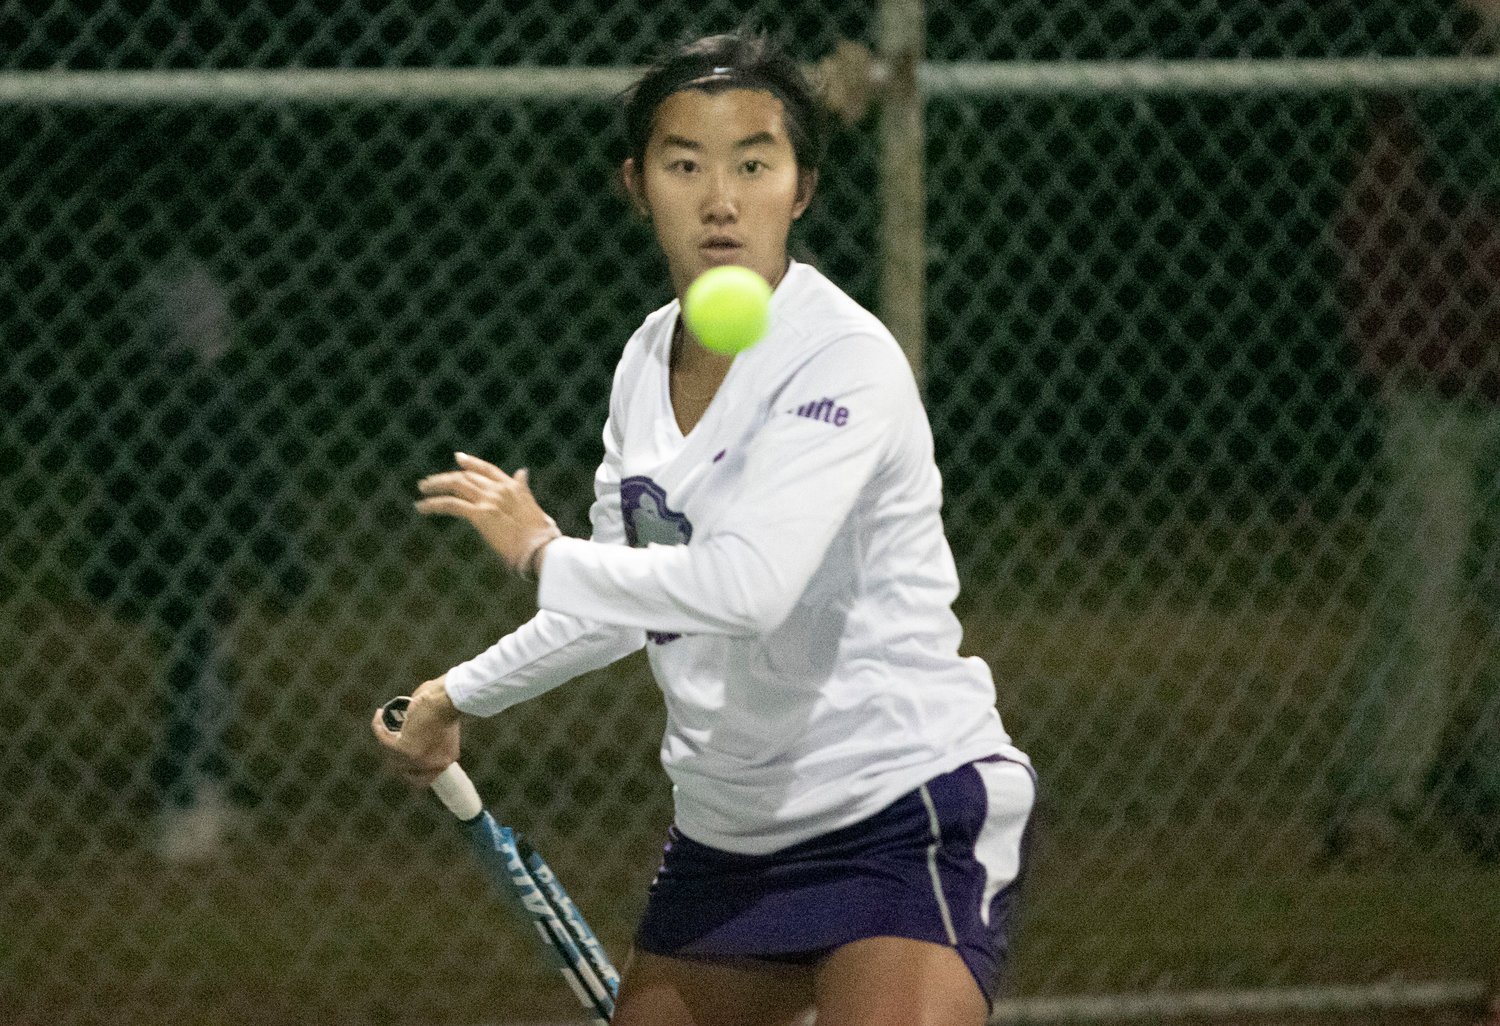 Huskies second singles player Eva White, thoroughly outplayed Prout’s Mia Renzzulli, winning in straight sets, 6-1, 6-1. The senior played her best match of the season, strategically using her crisp ground strokes to run Renzulli and force her into errors.